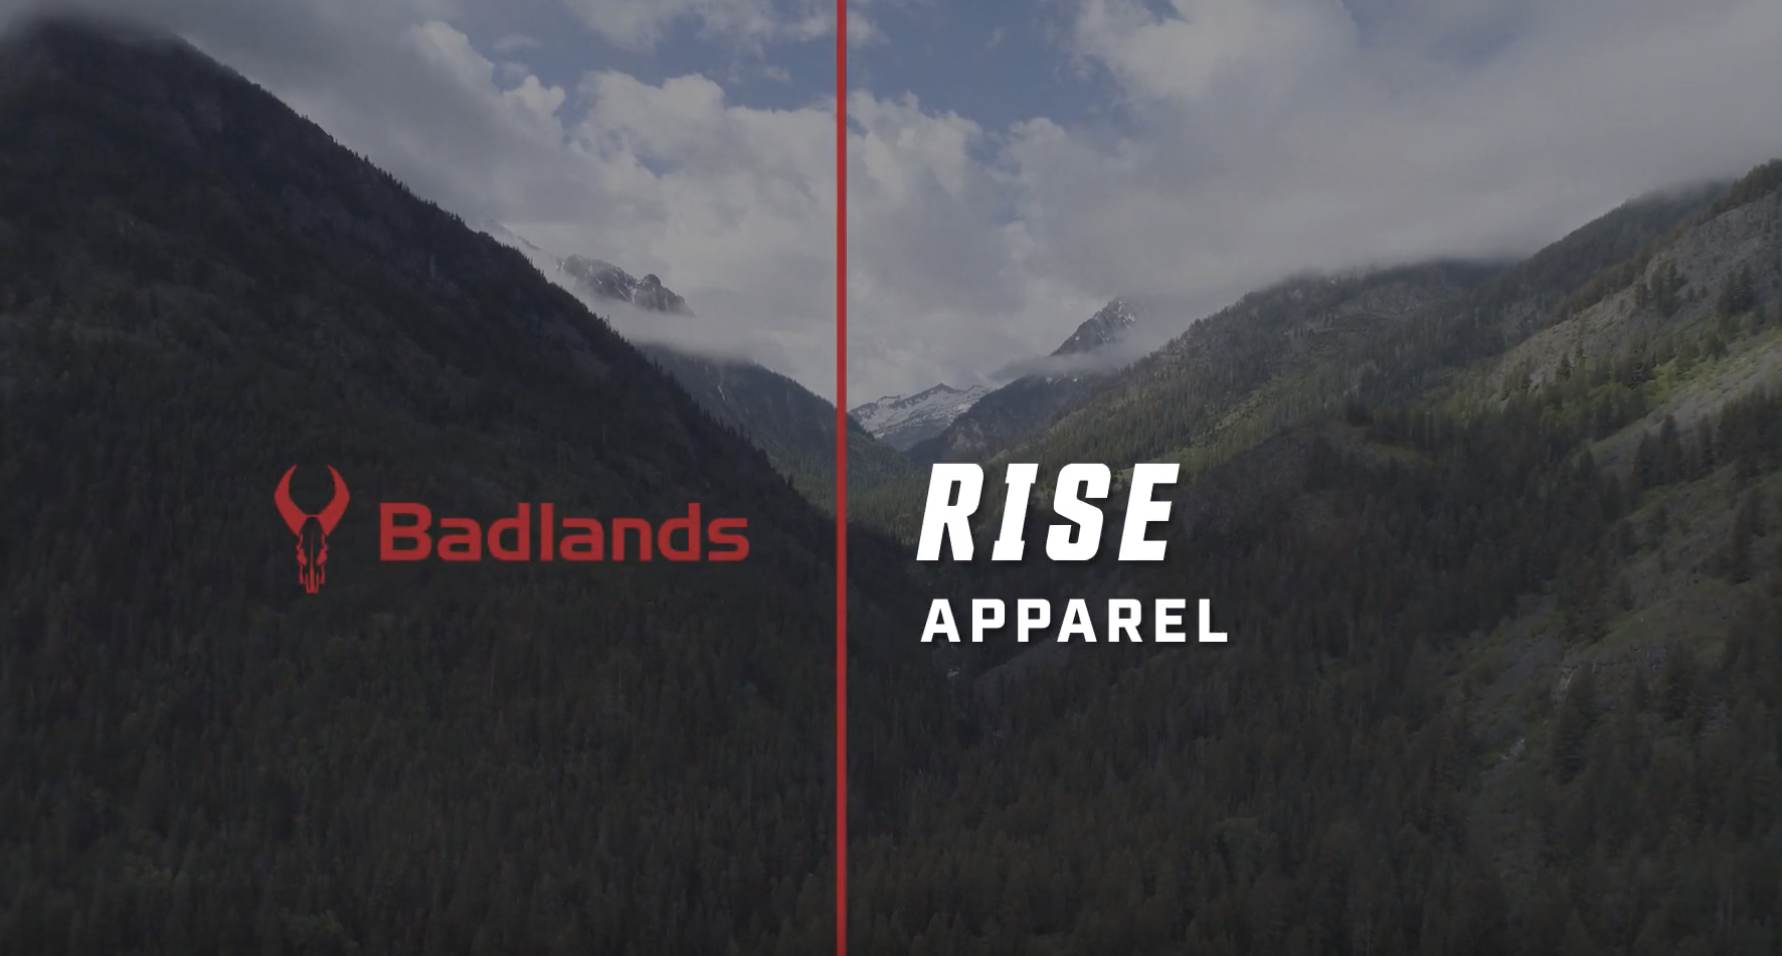 Learn more about the Rise Apparel